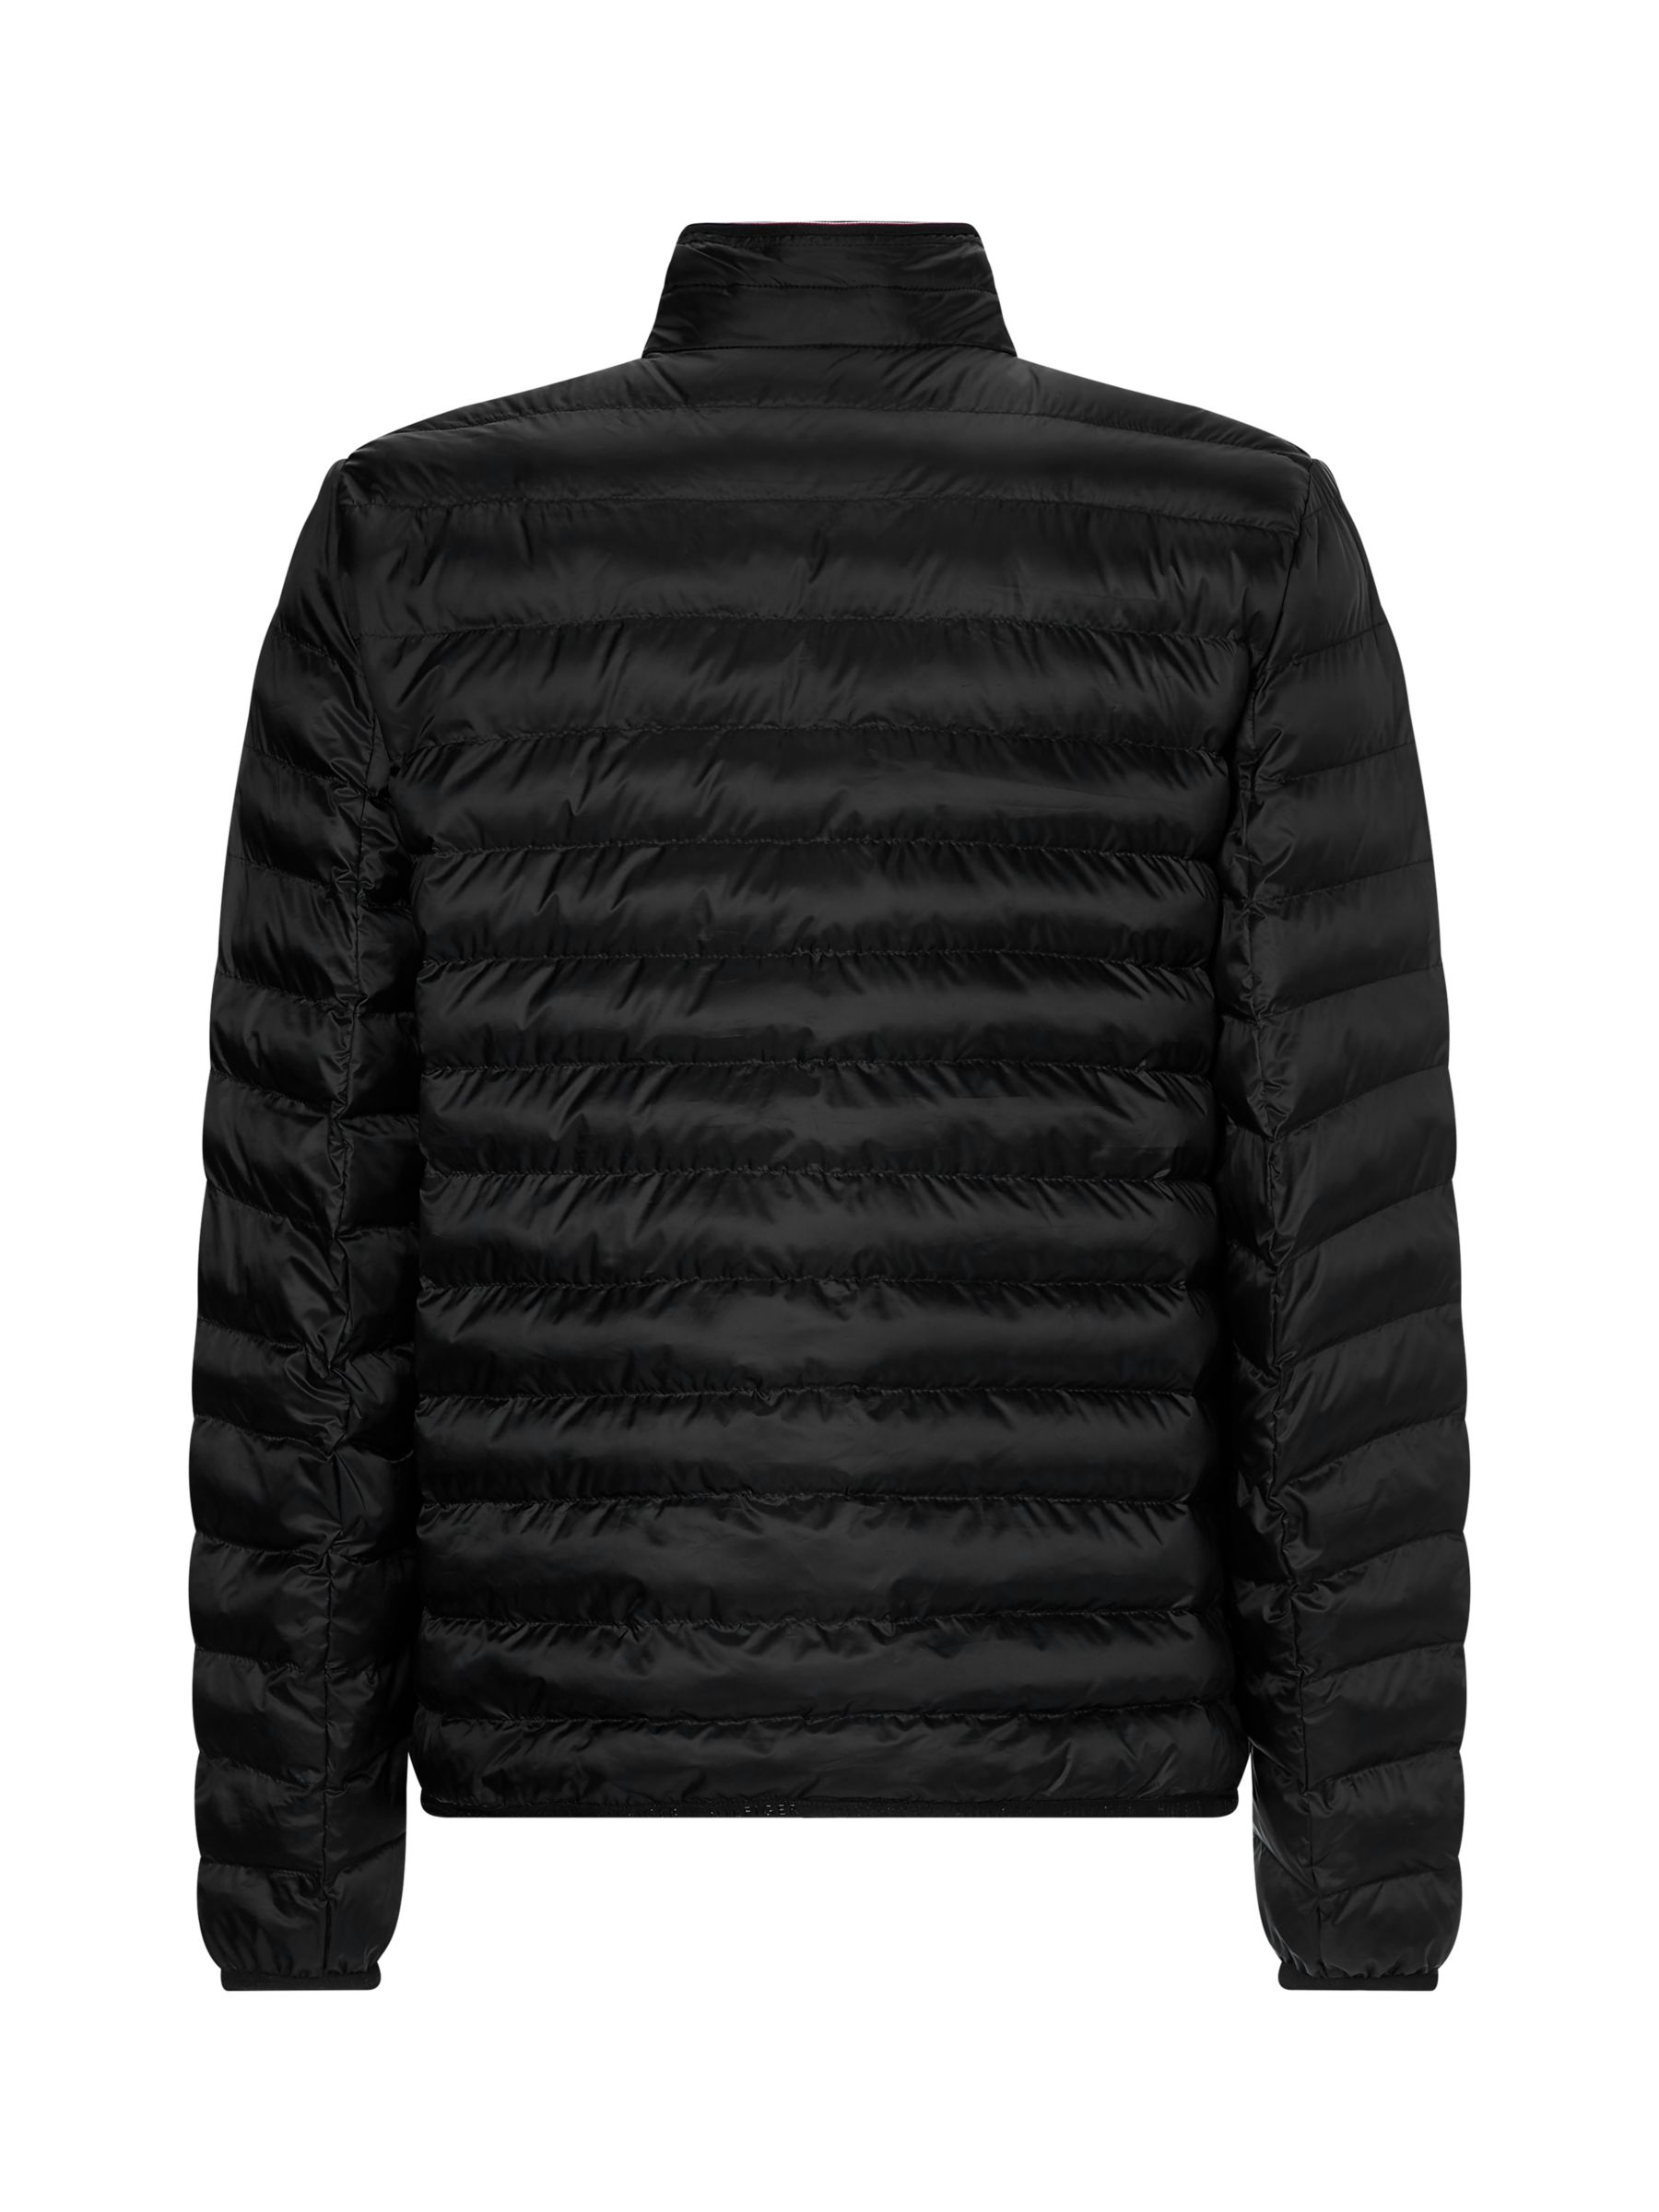 Tommy Hilfiger Packable Down Quilted Jacket, Black at John Lewis & Partners